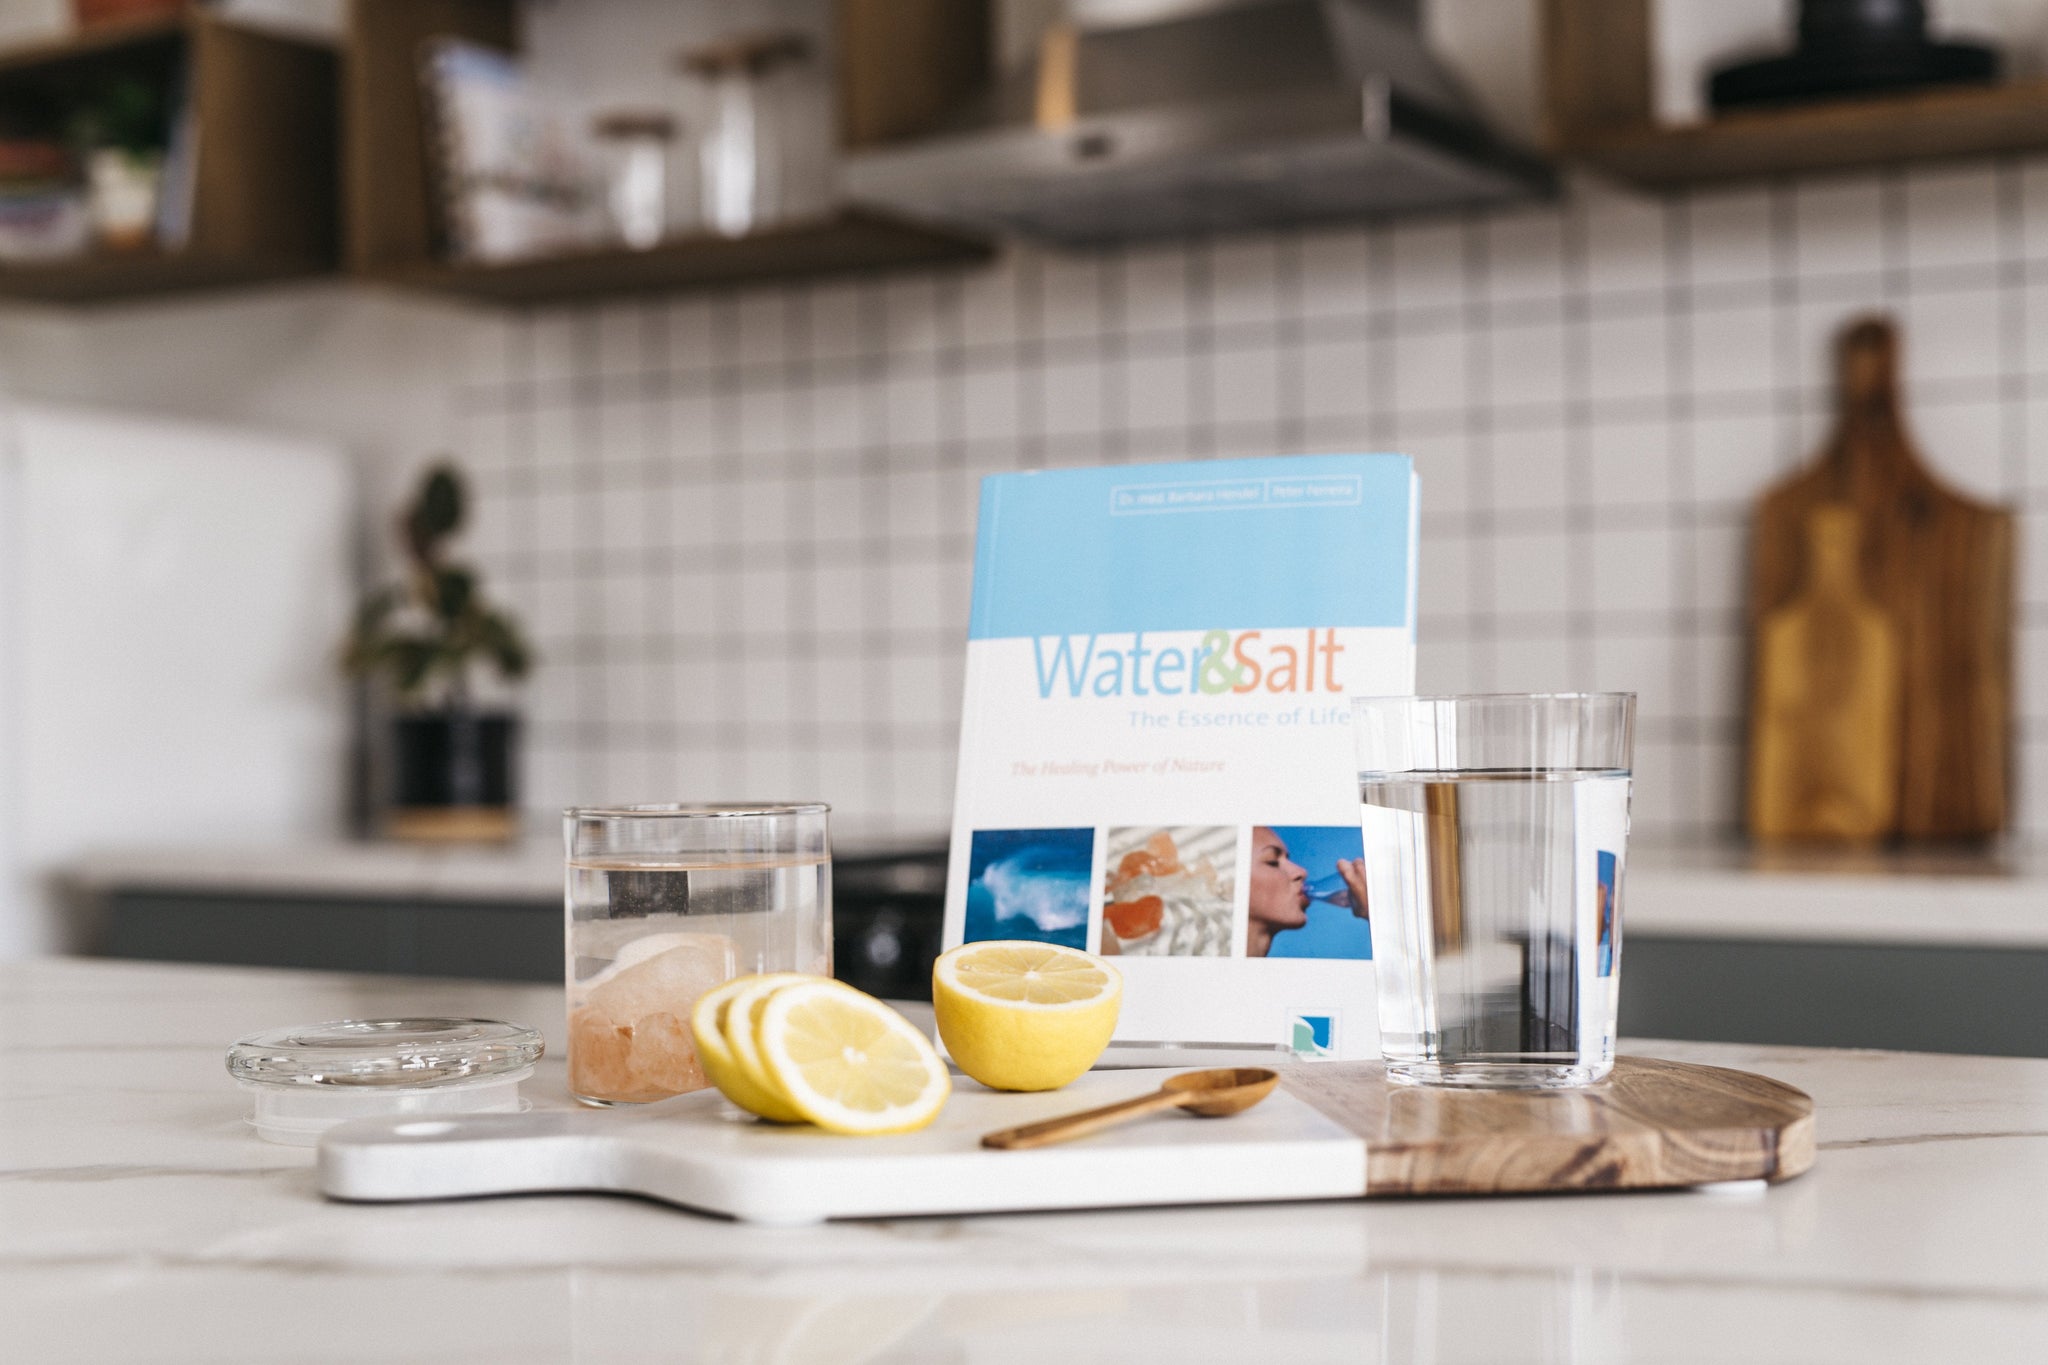 Turquoise and white Water & Salt The Essence of Life Book showing blue ocean, salt stones and woman drinking water from clear bottle, leaning on kitchen counter with glass jar filled with Himalayan Crystal Salt Stones and water, sliced lemons, wooden spoon, glass of water and cutting board